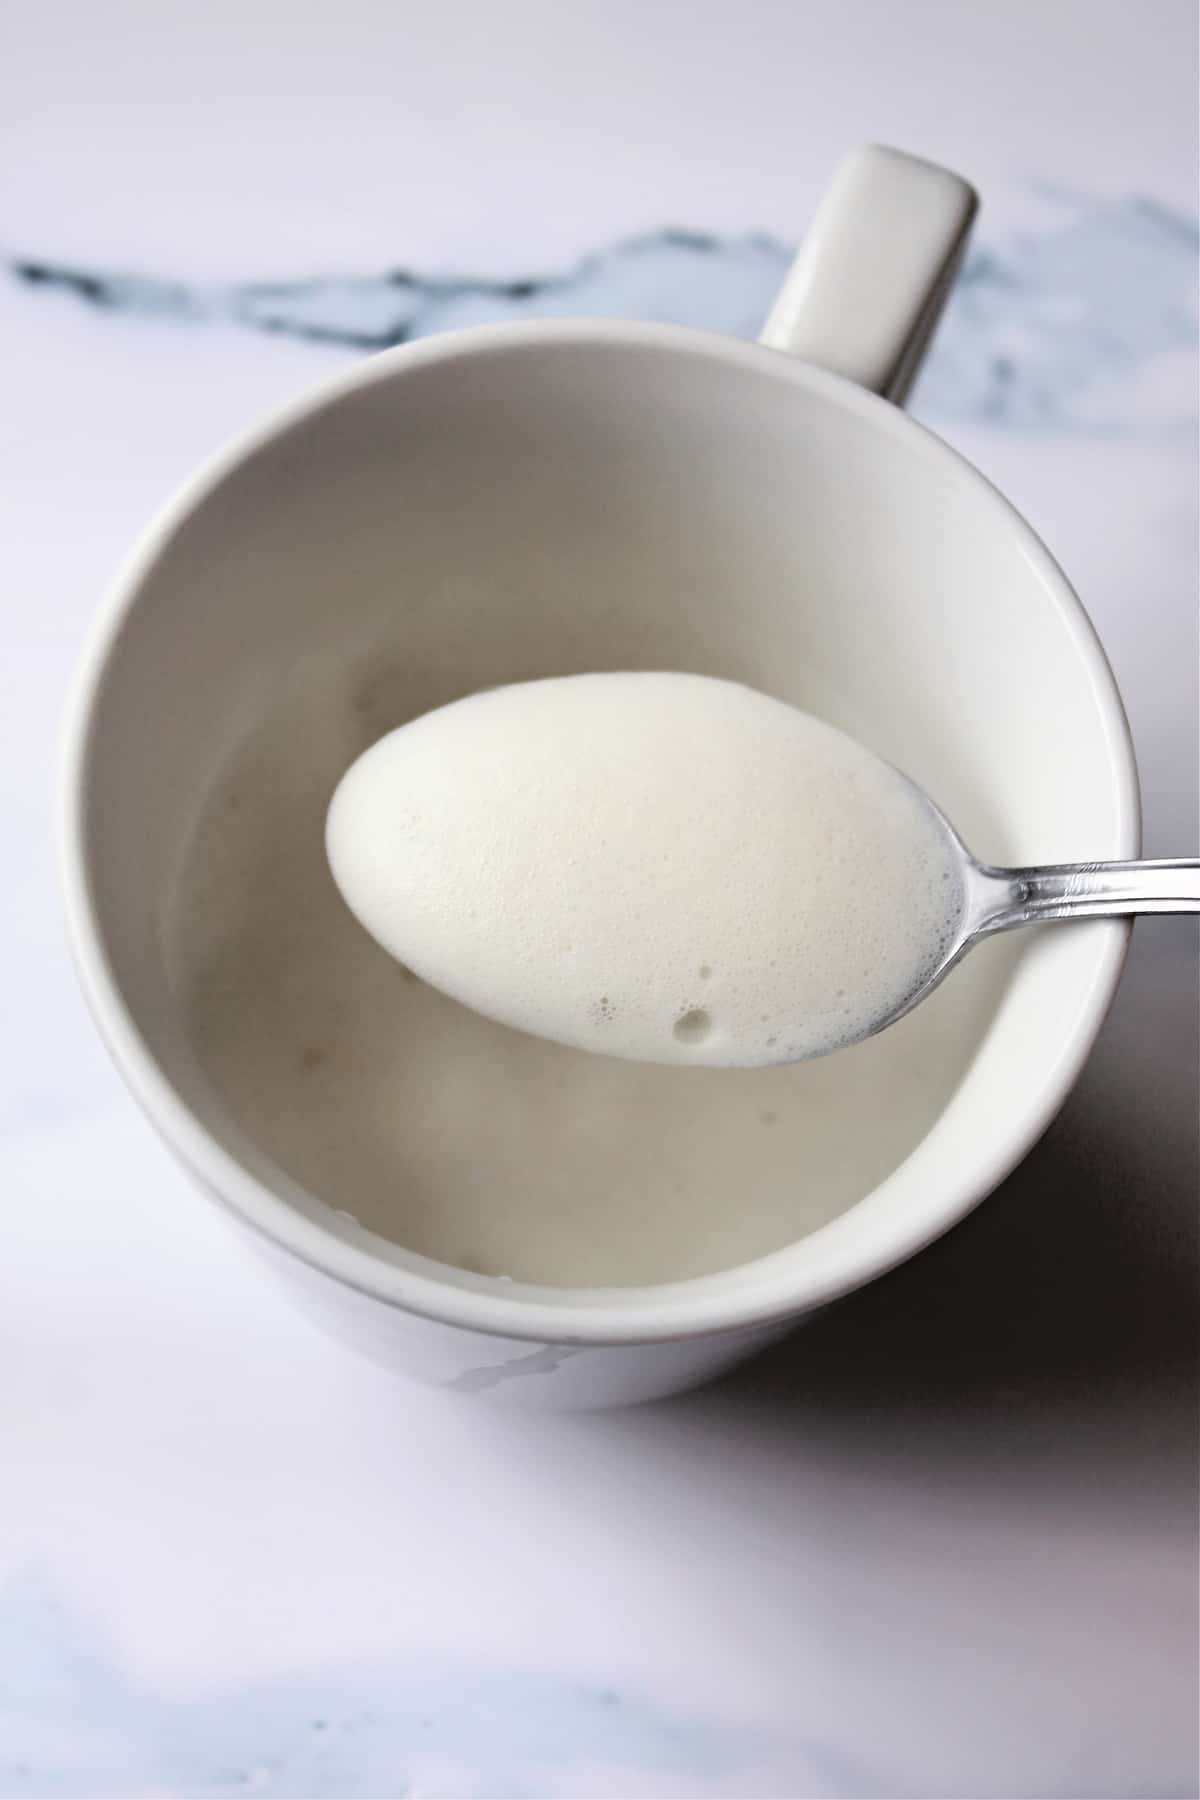 Frothed milk on a spoon to show texture.